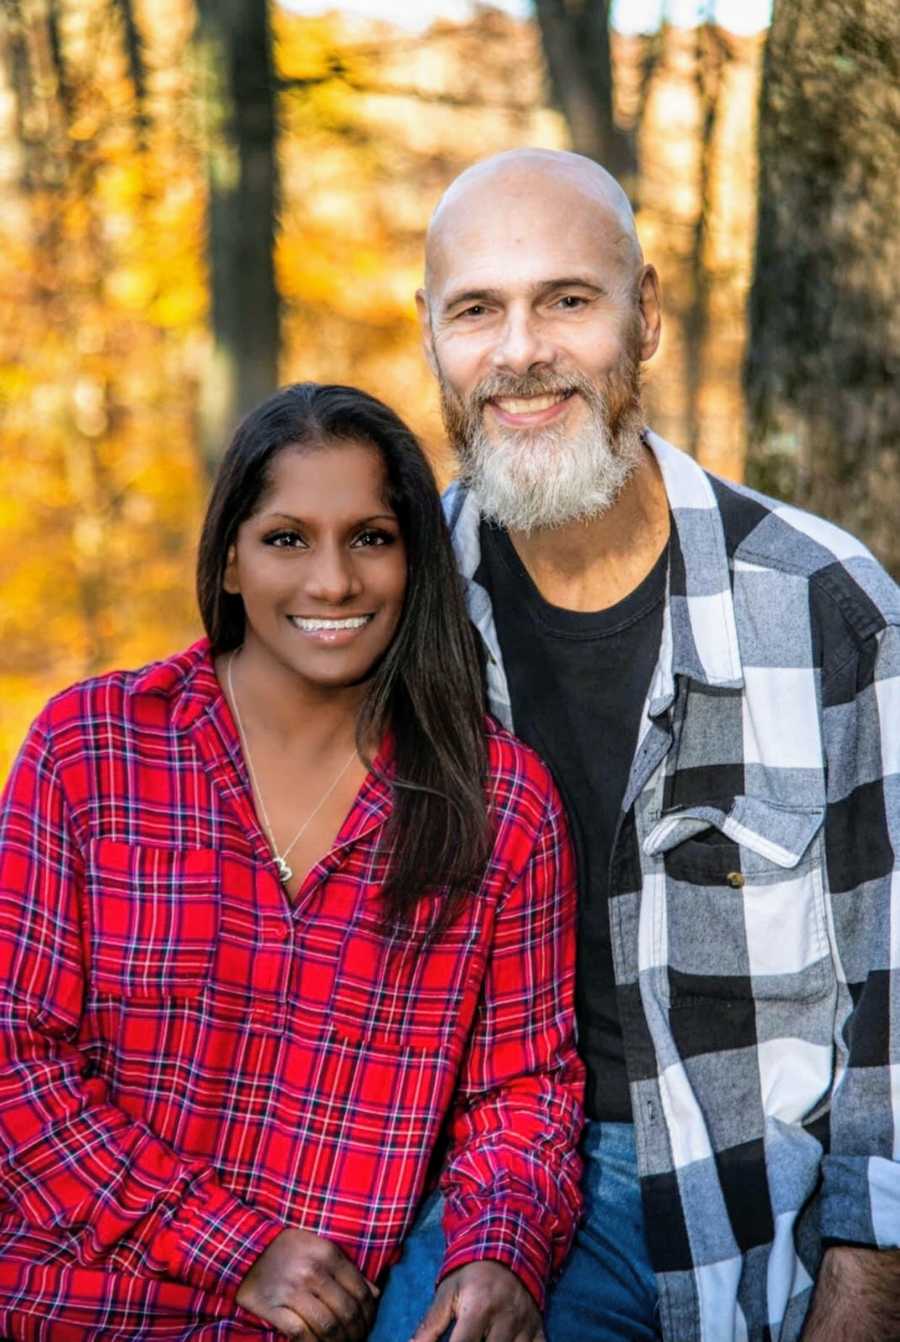 An adoptee and her partner in front of trees in the fall